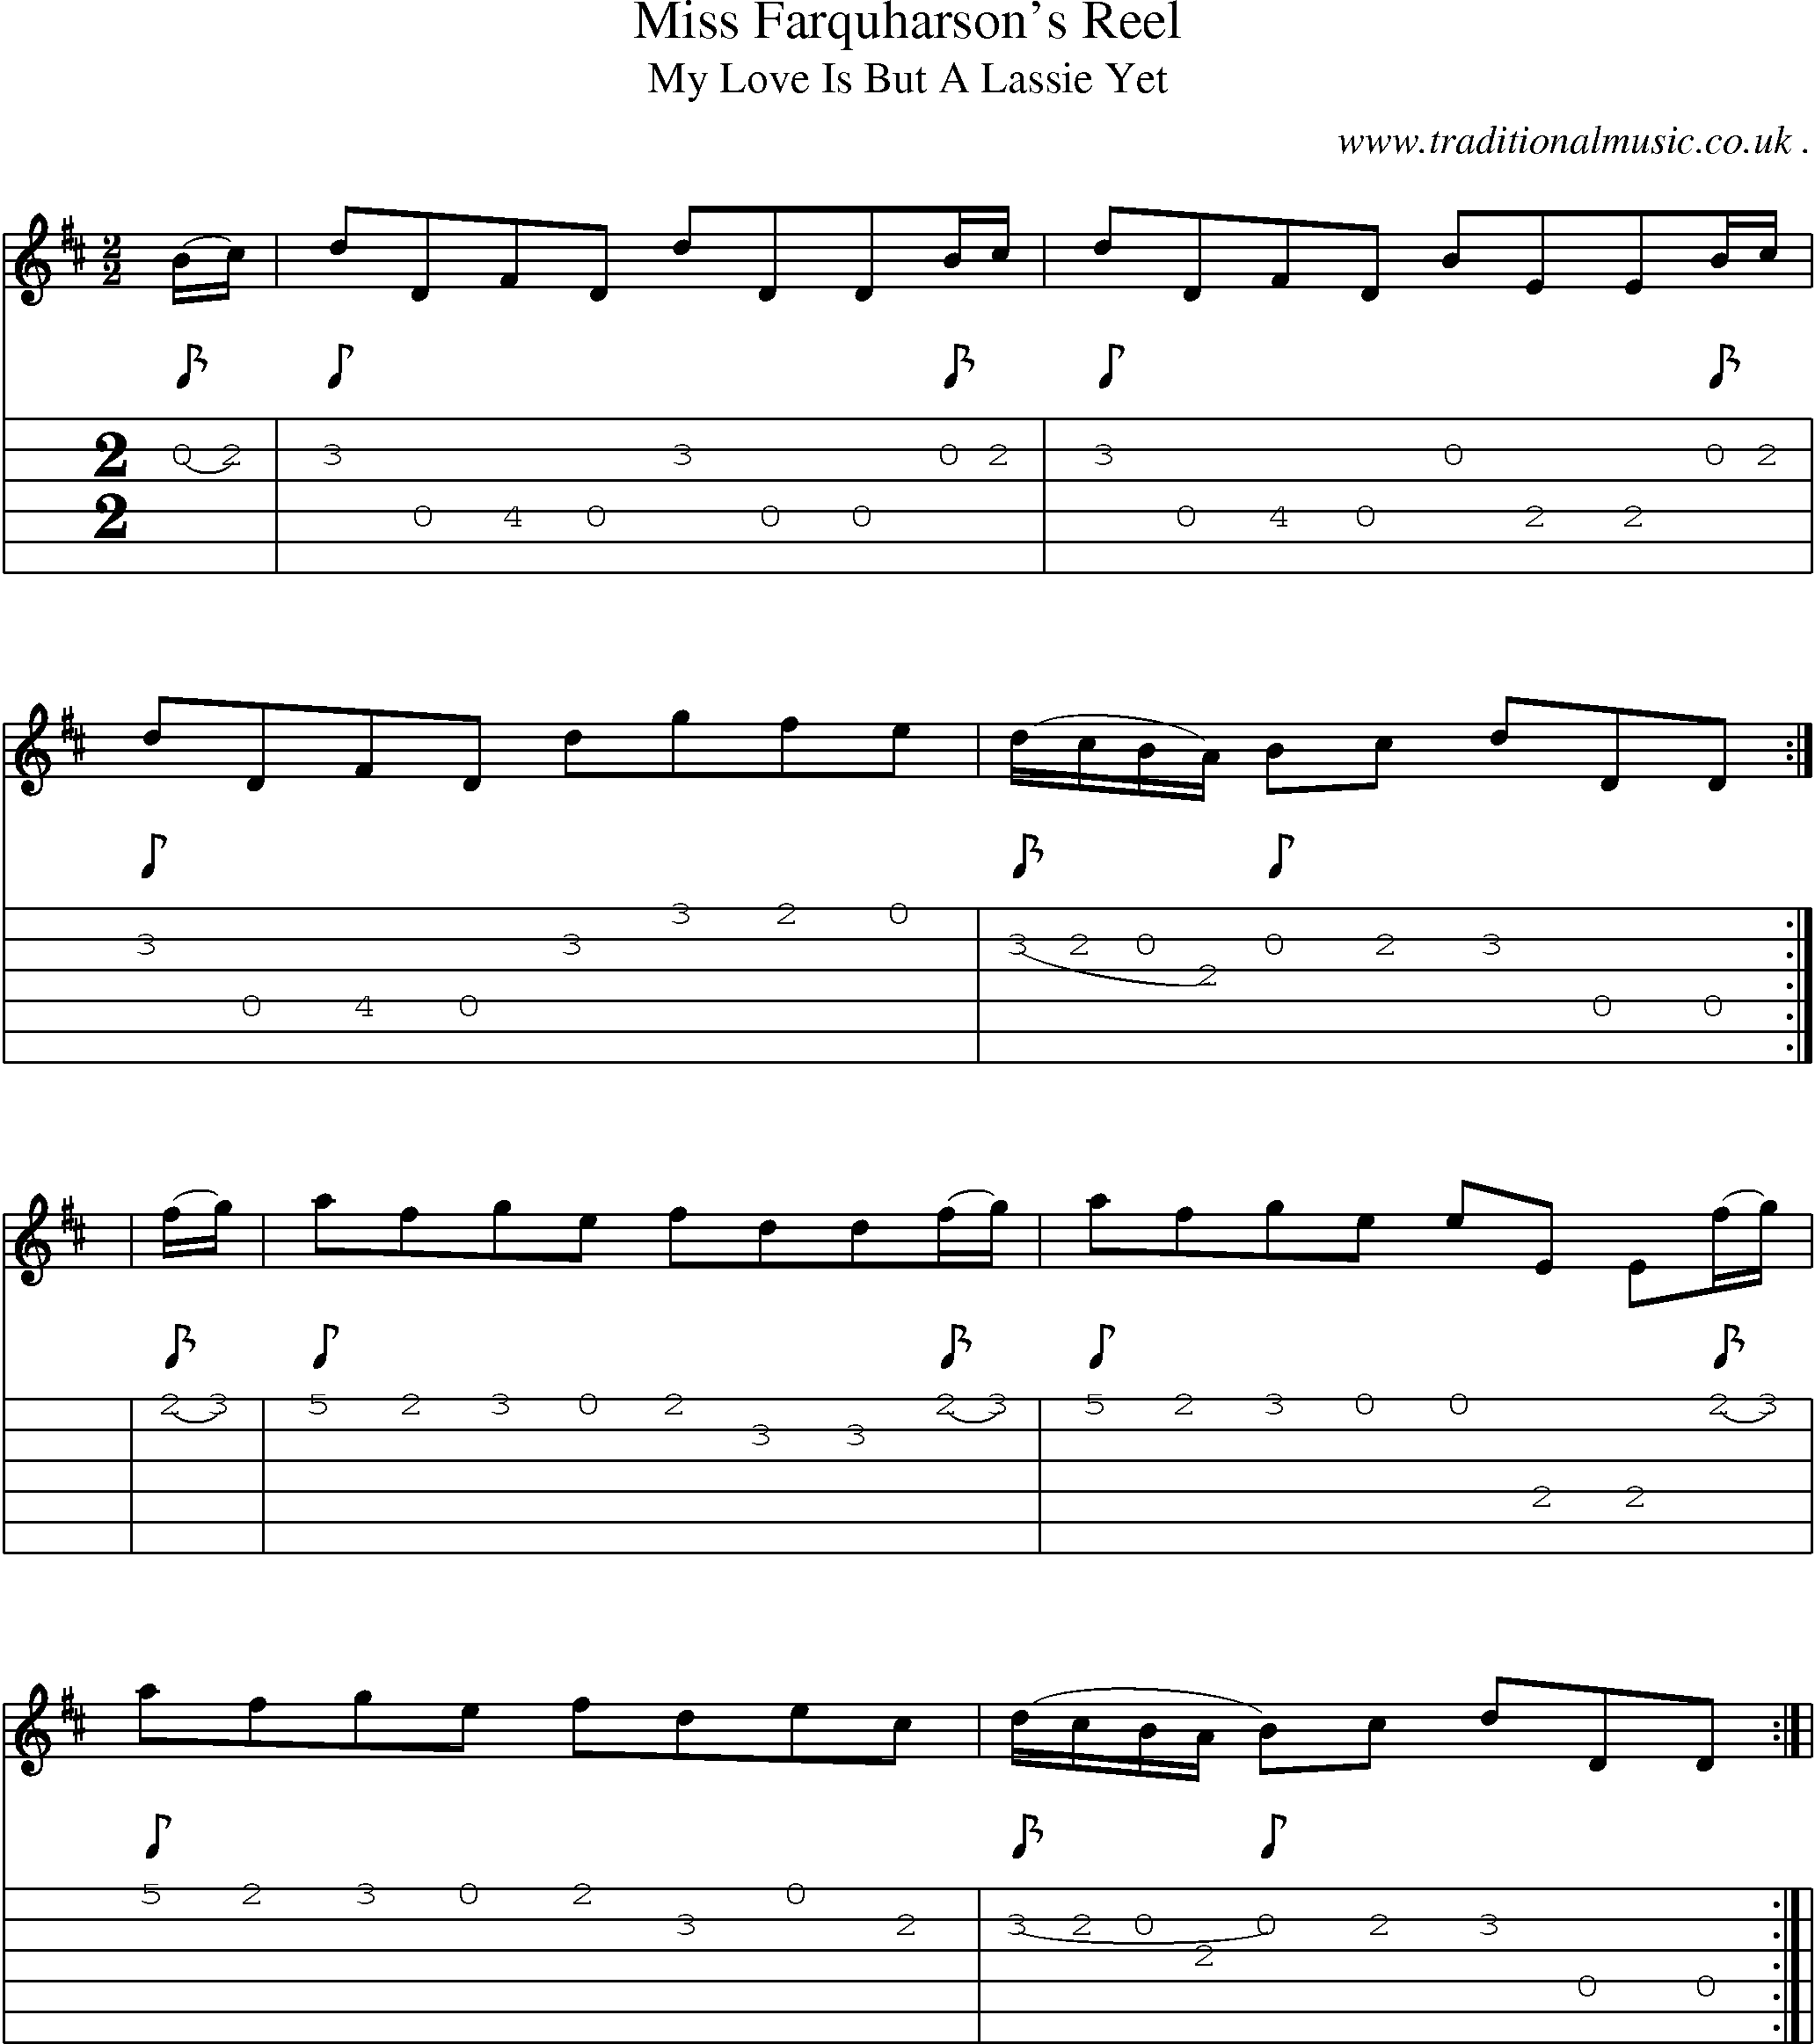 Sheet-Music and Guitar Tabs for Miss Farquharsons Reel